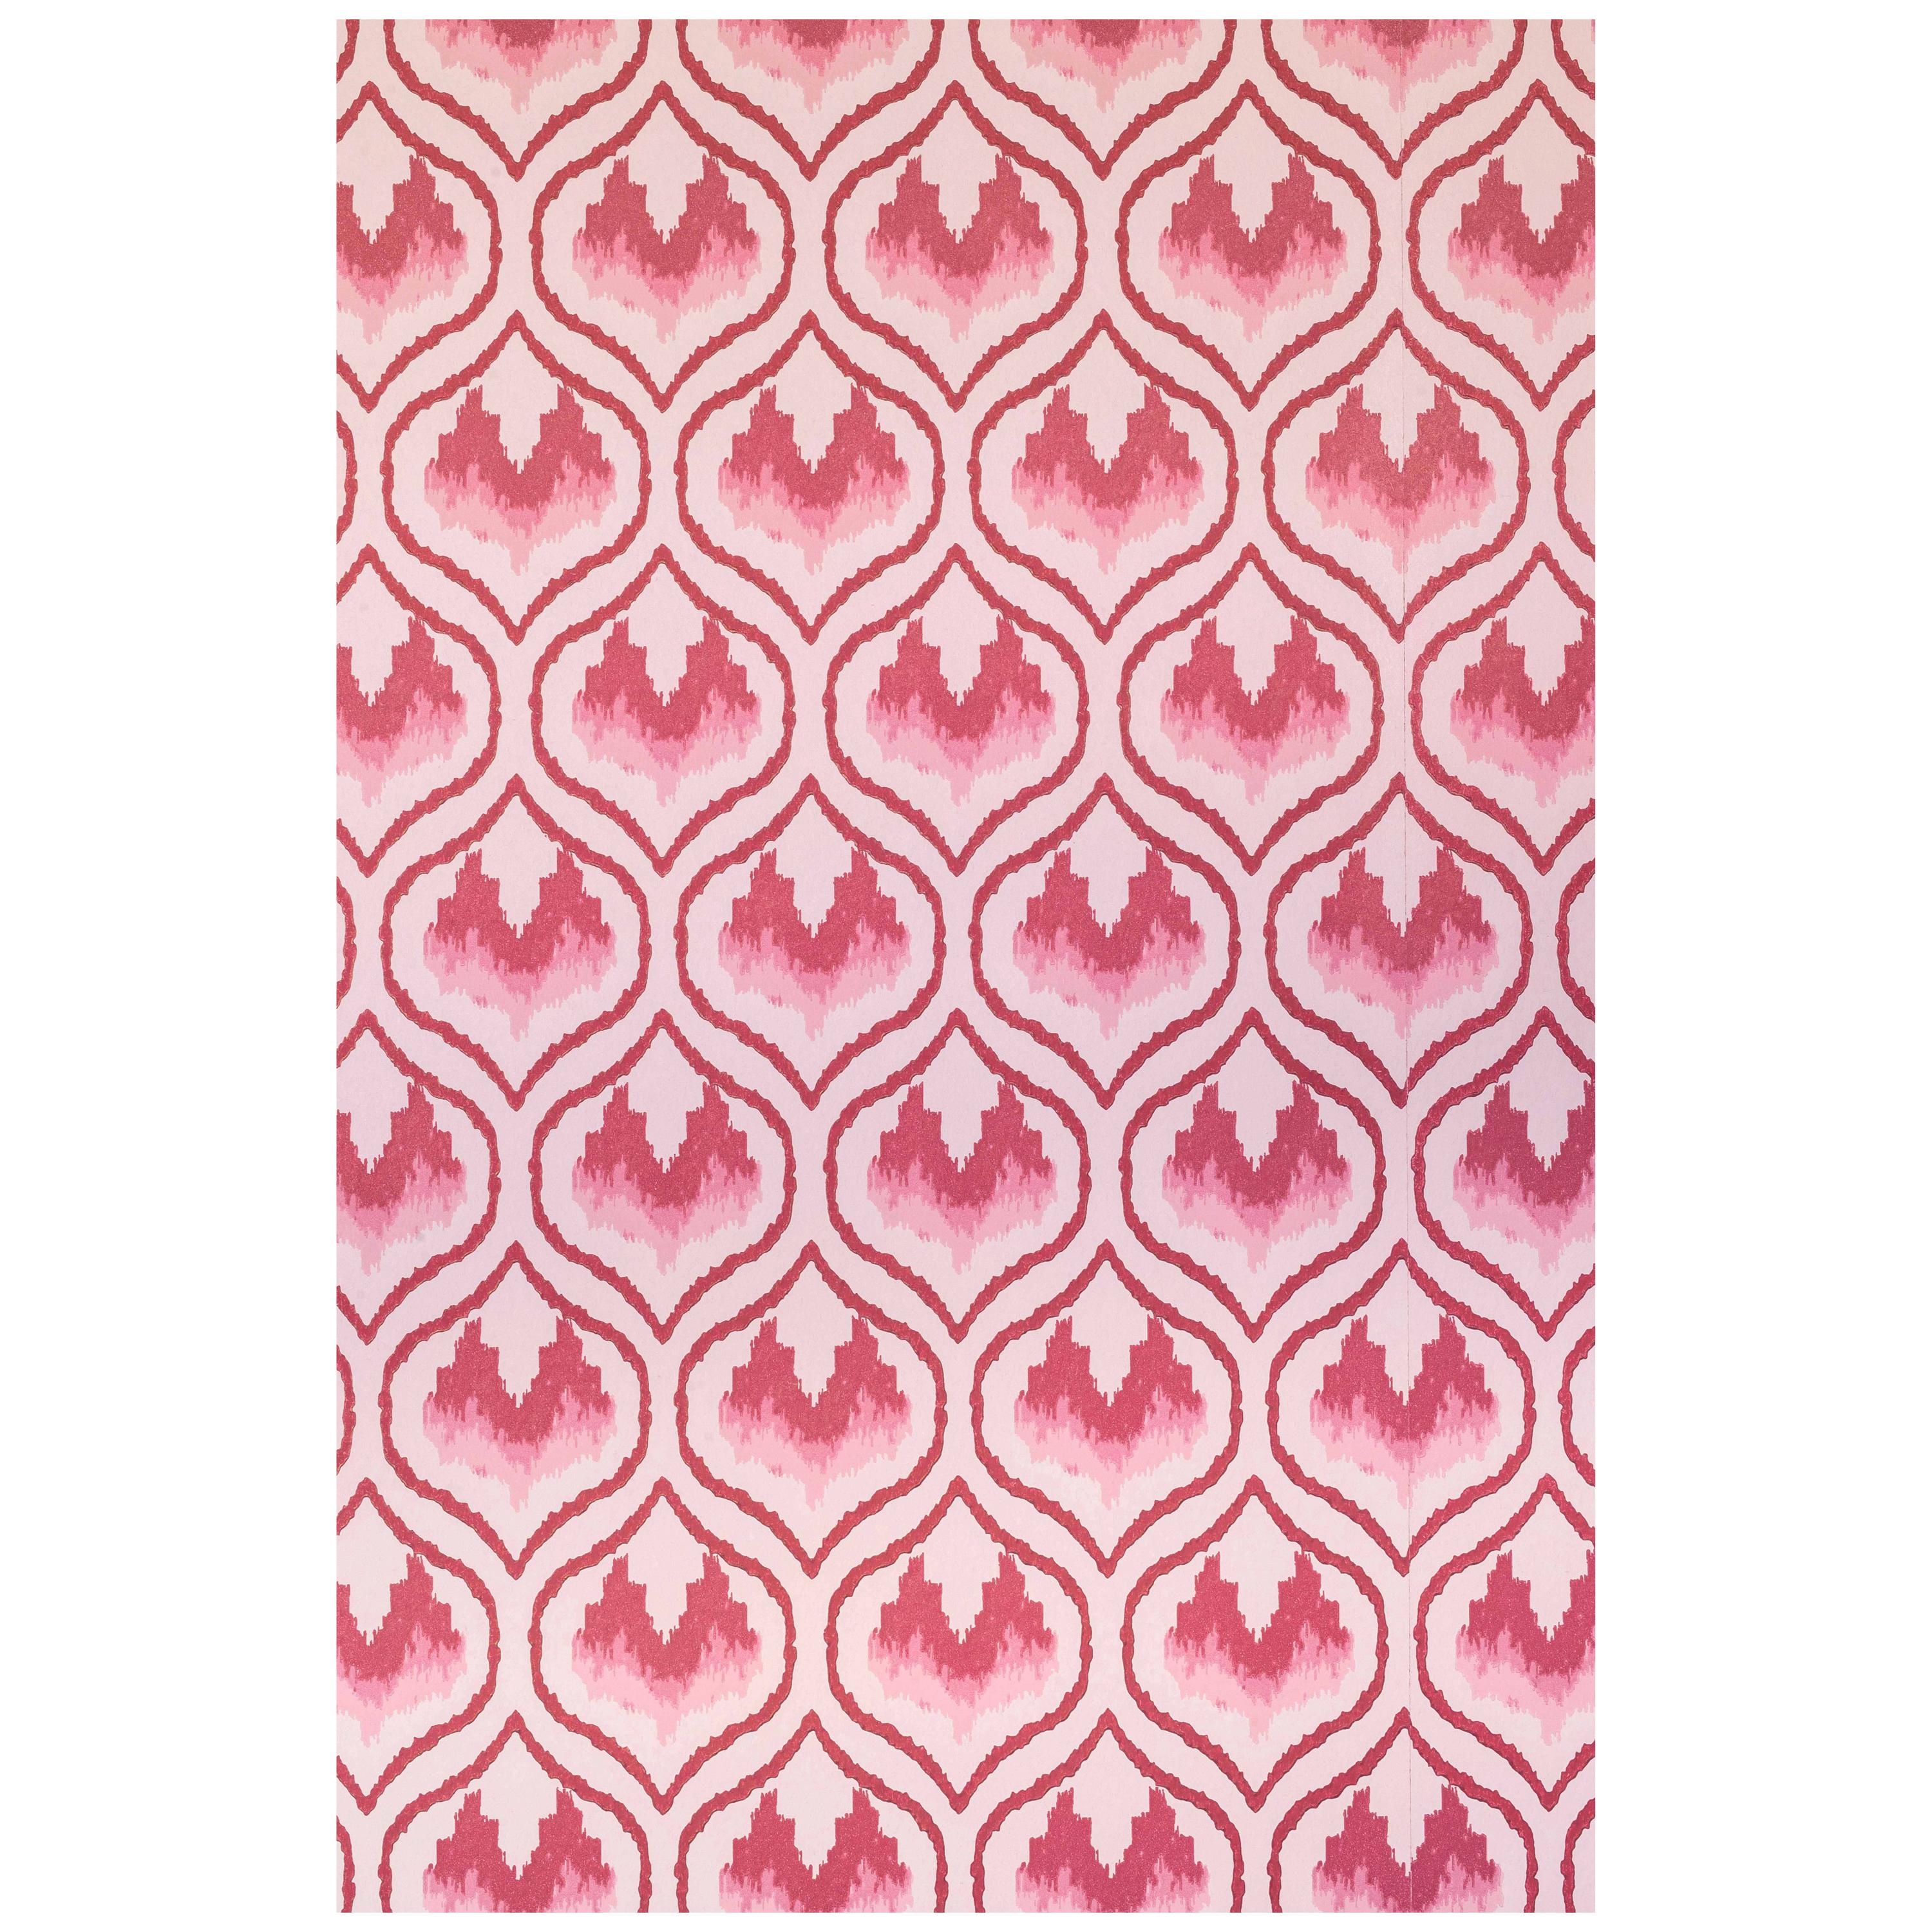 'Ikat Heart' Contemporary, Traditional Wallpaper in Oxblood For Sale